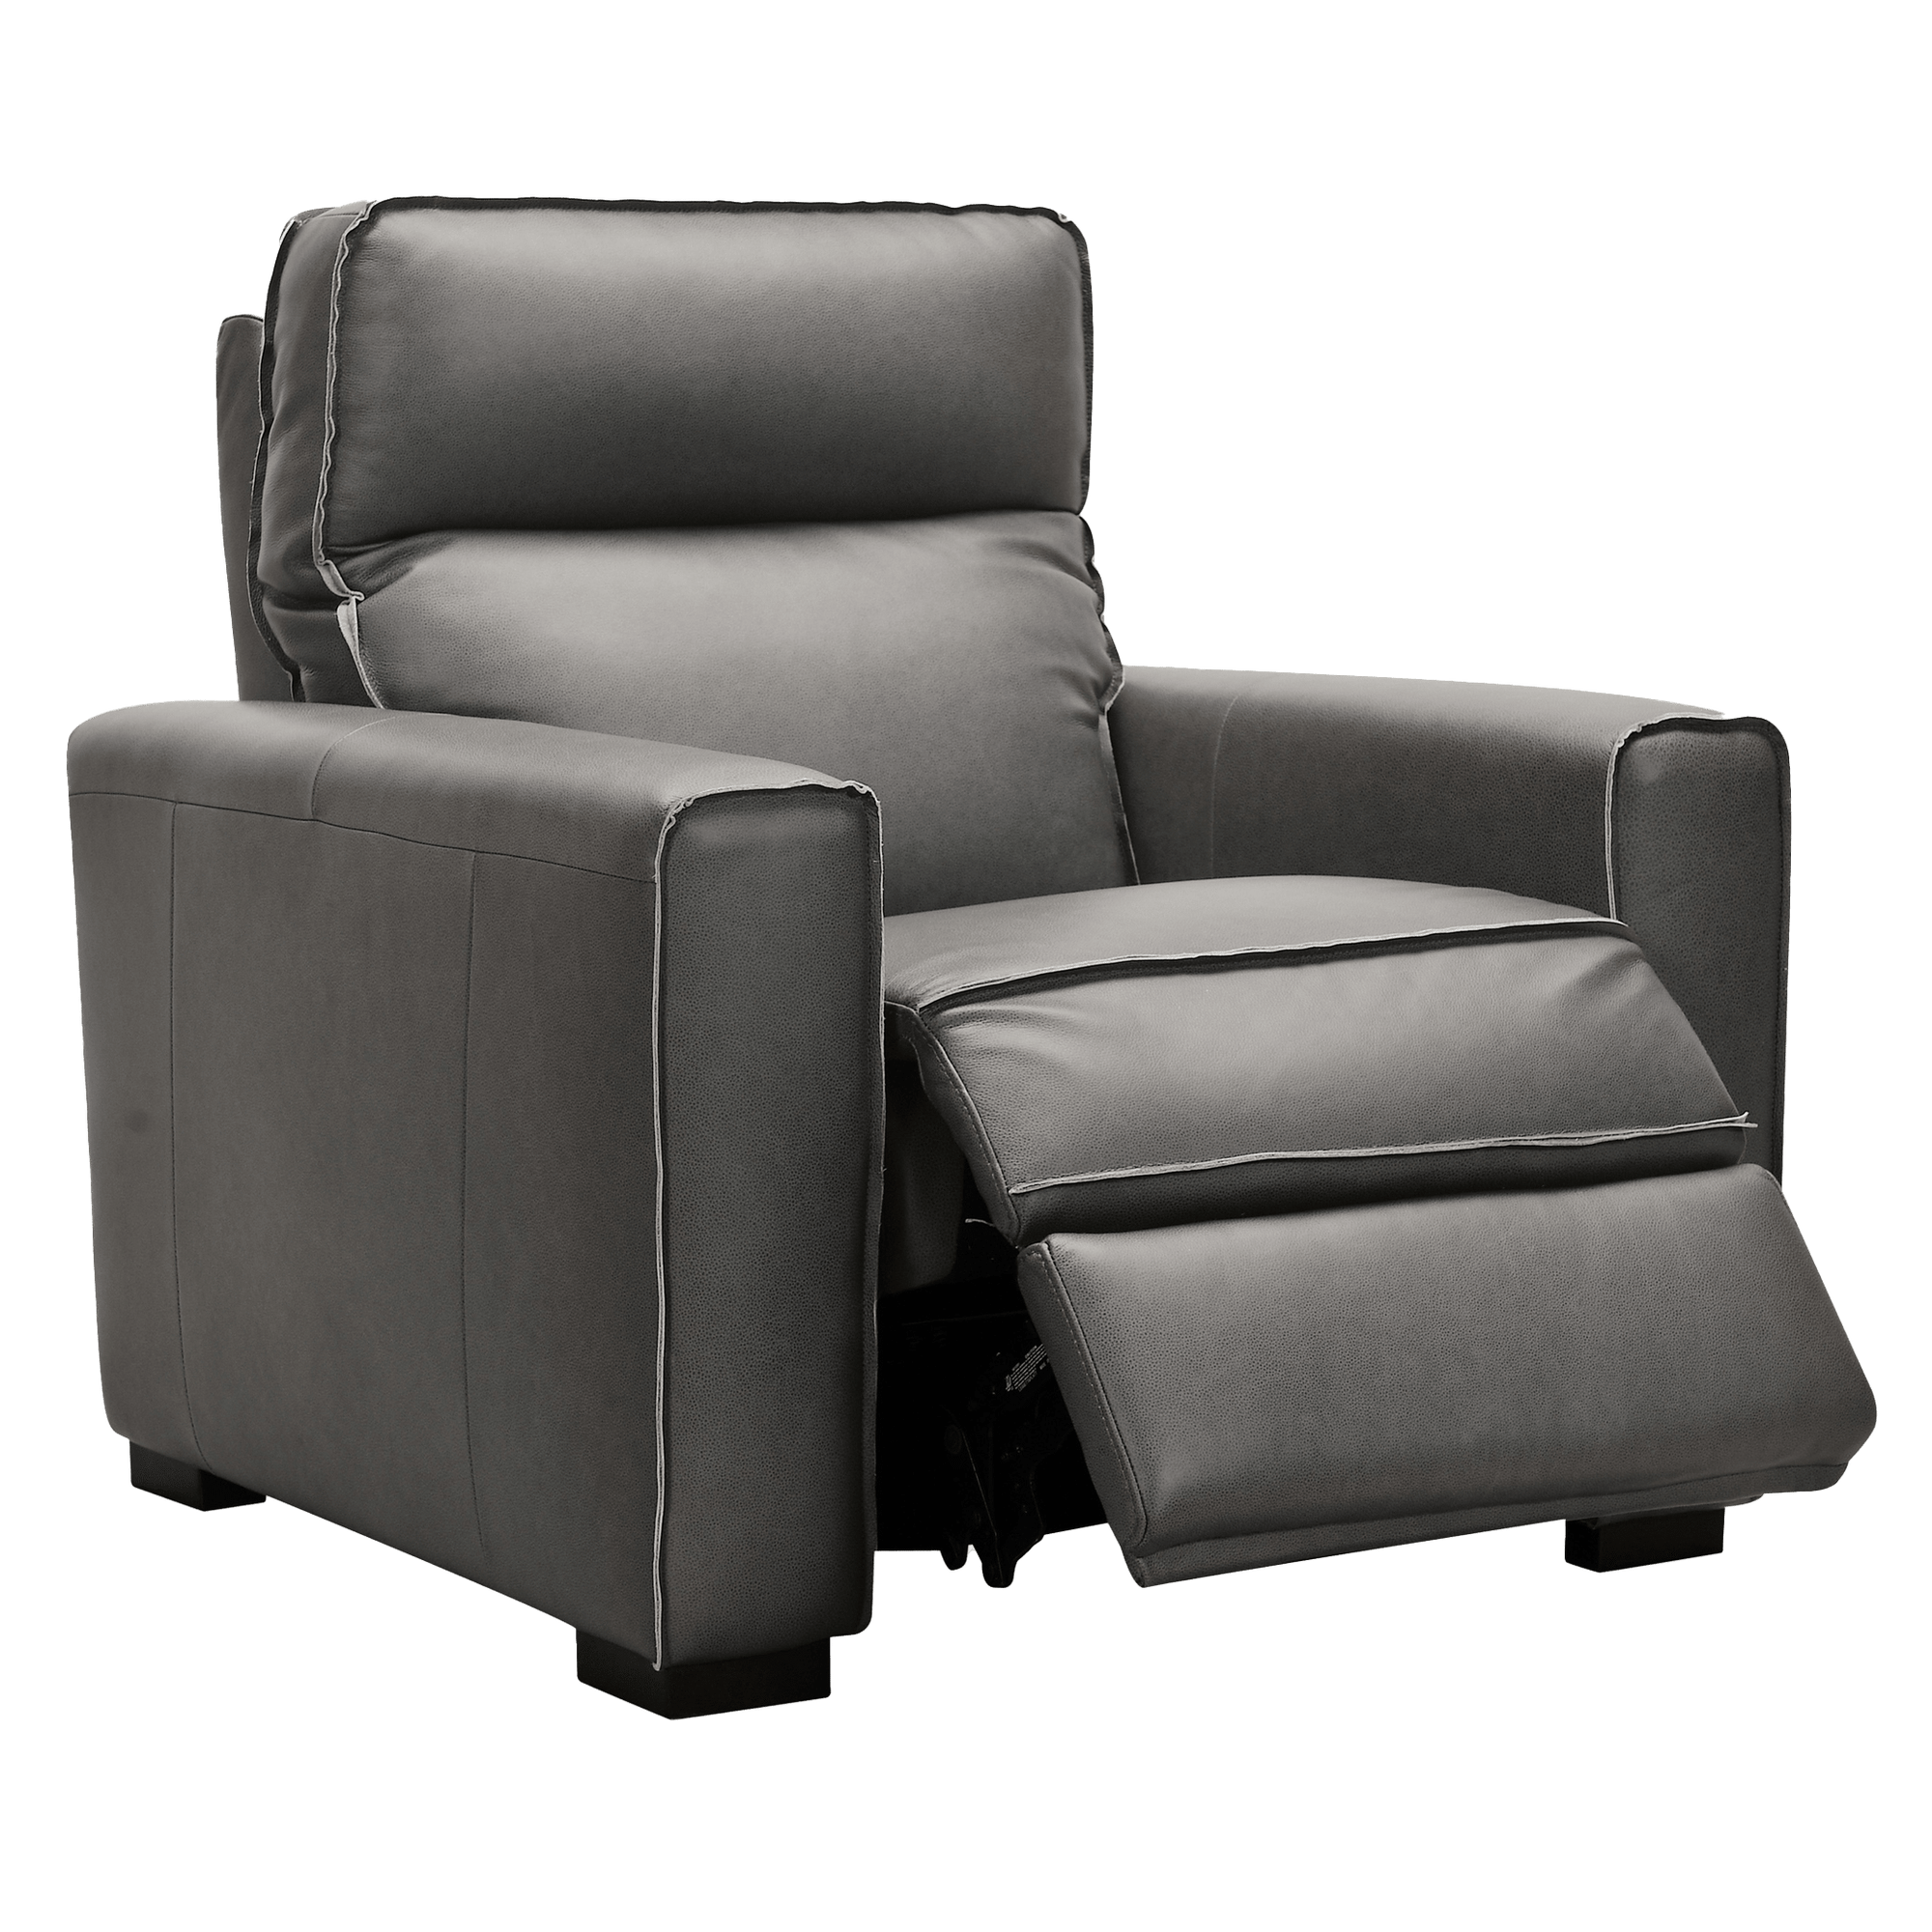 Baxlee Leather Power Recliner with Articulating Headrest, Leather, Gray